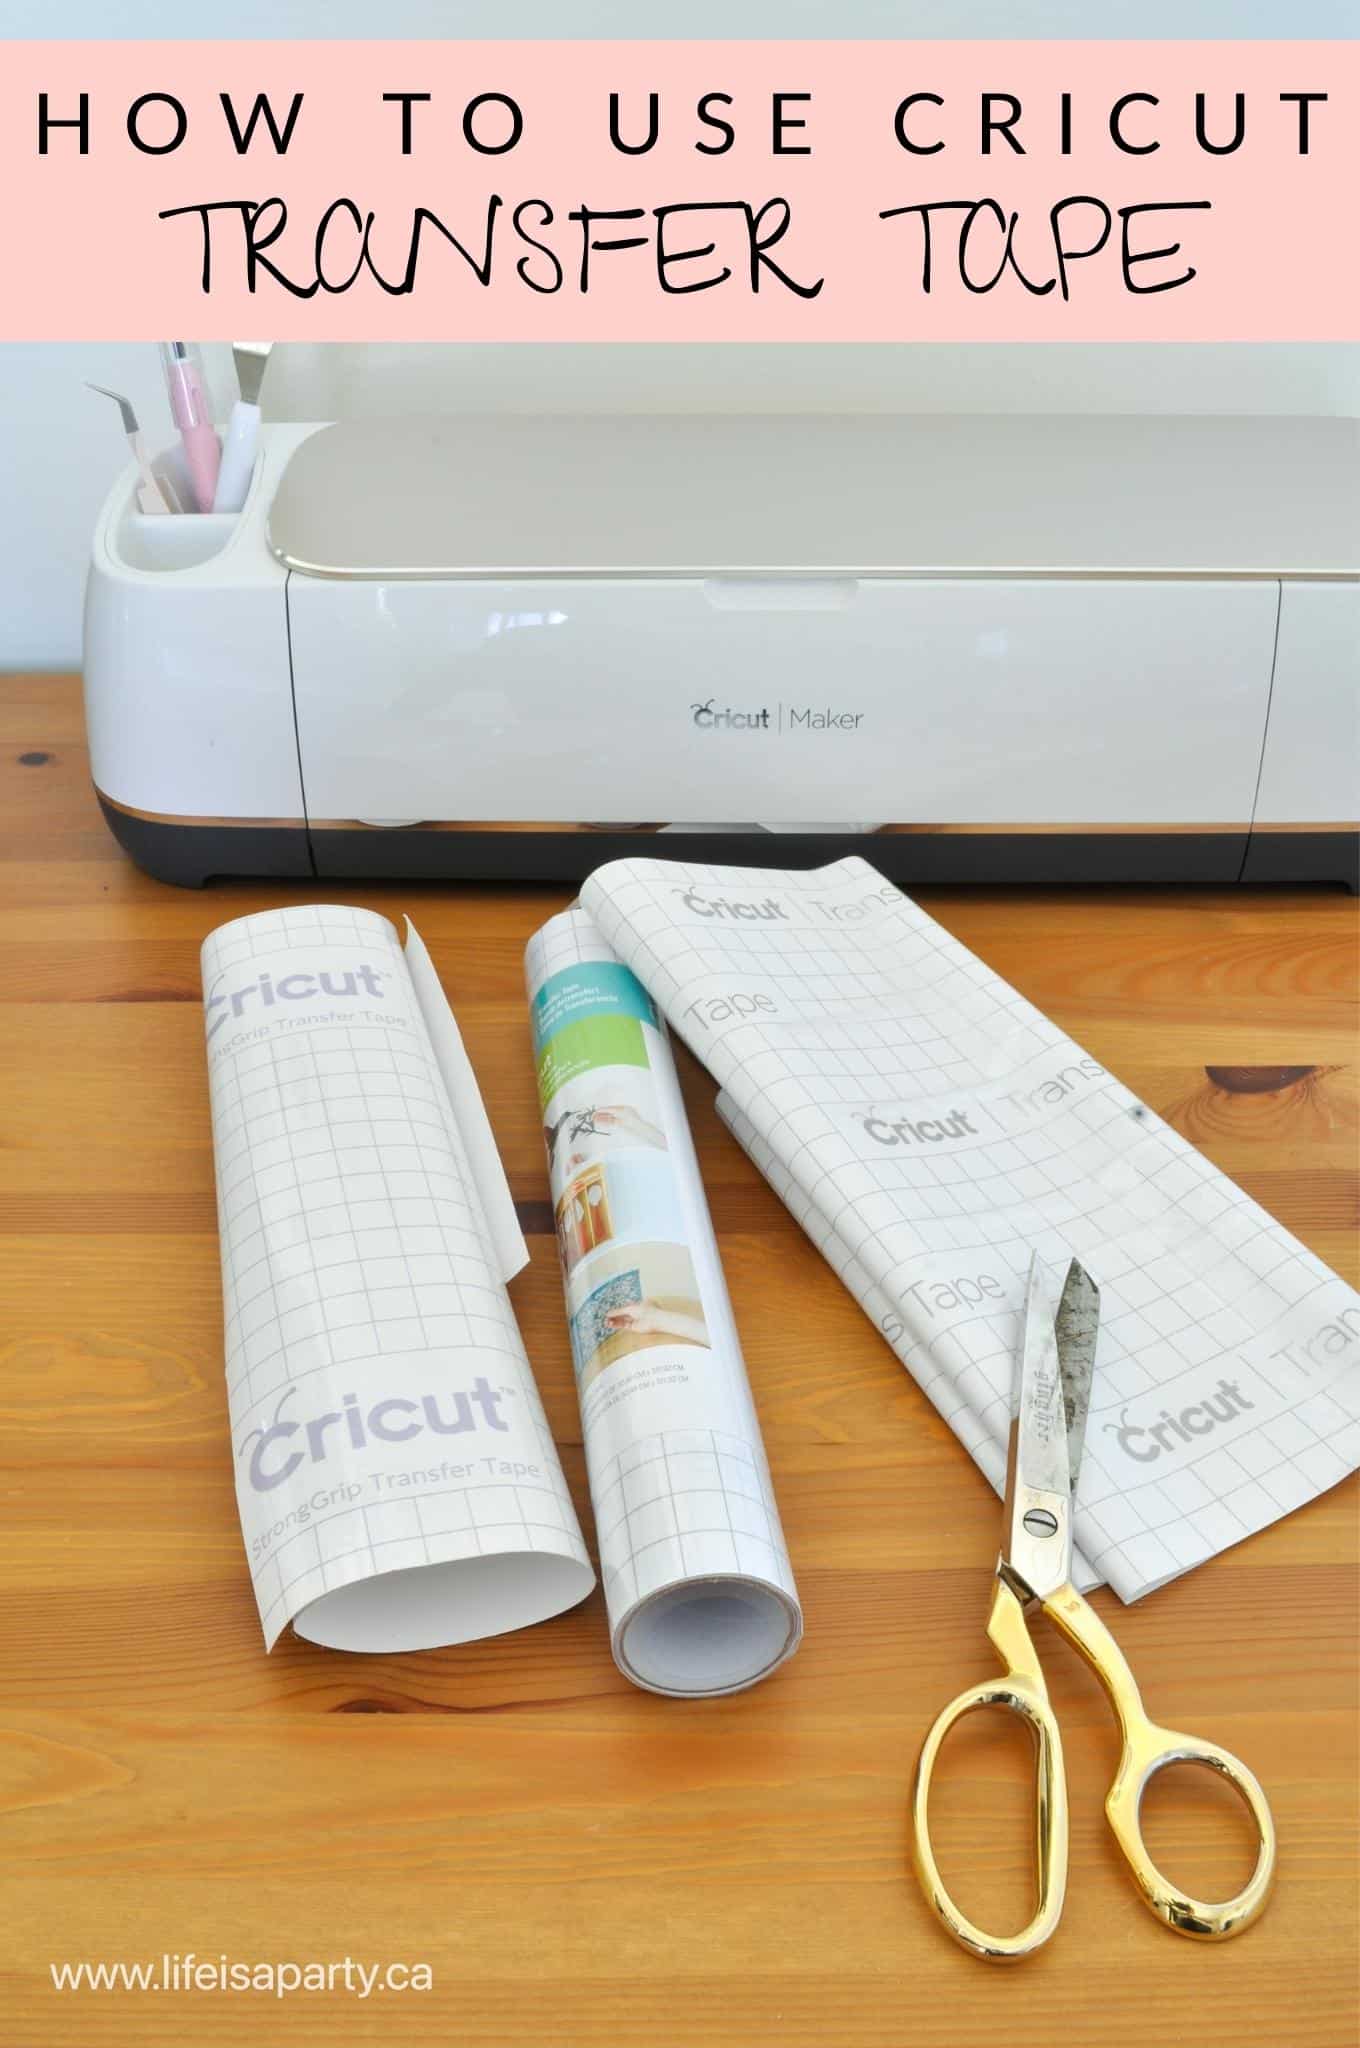 How To Use Cricut Transfer Tape: step by step guide on how to use Cricut transfer tape with vinyl projects.